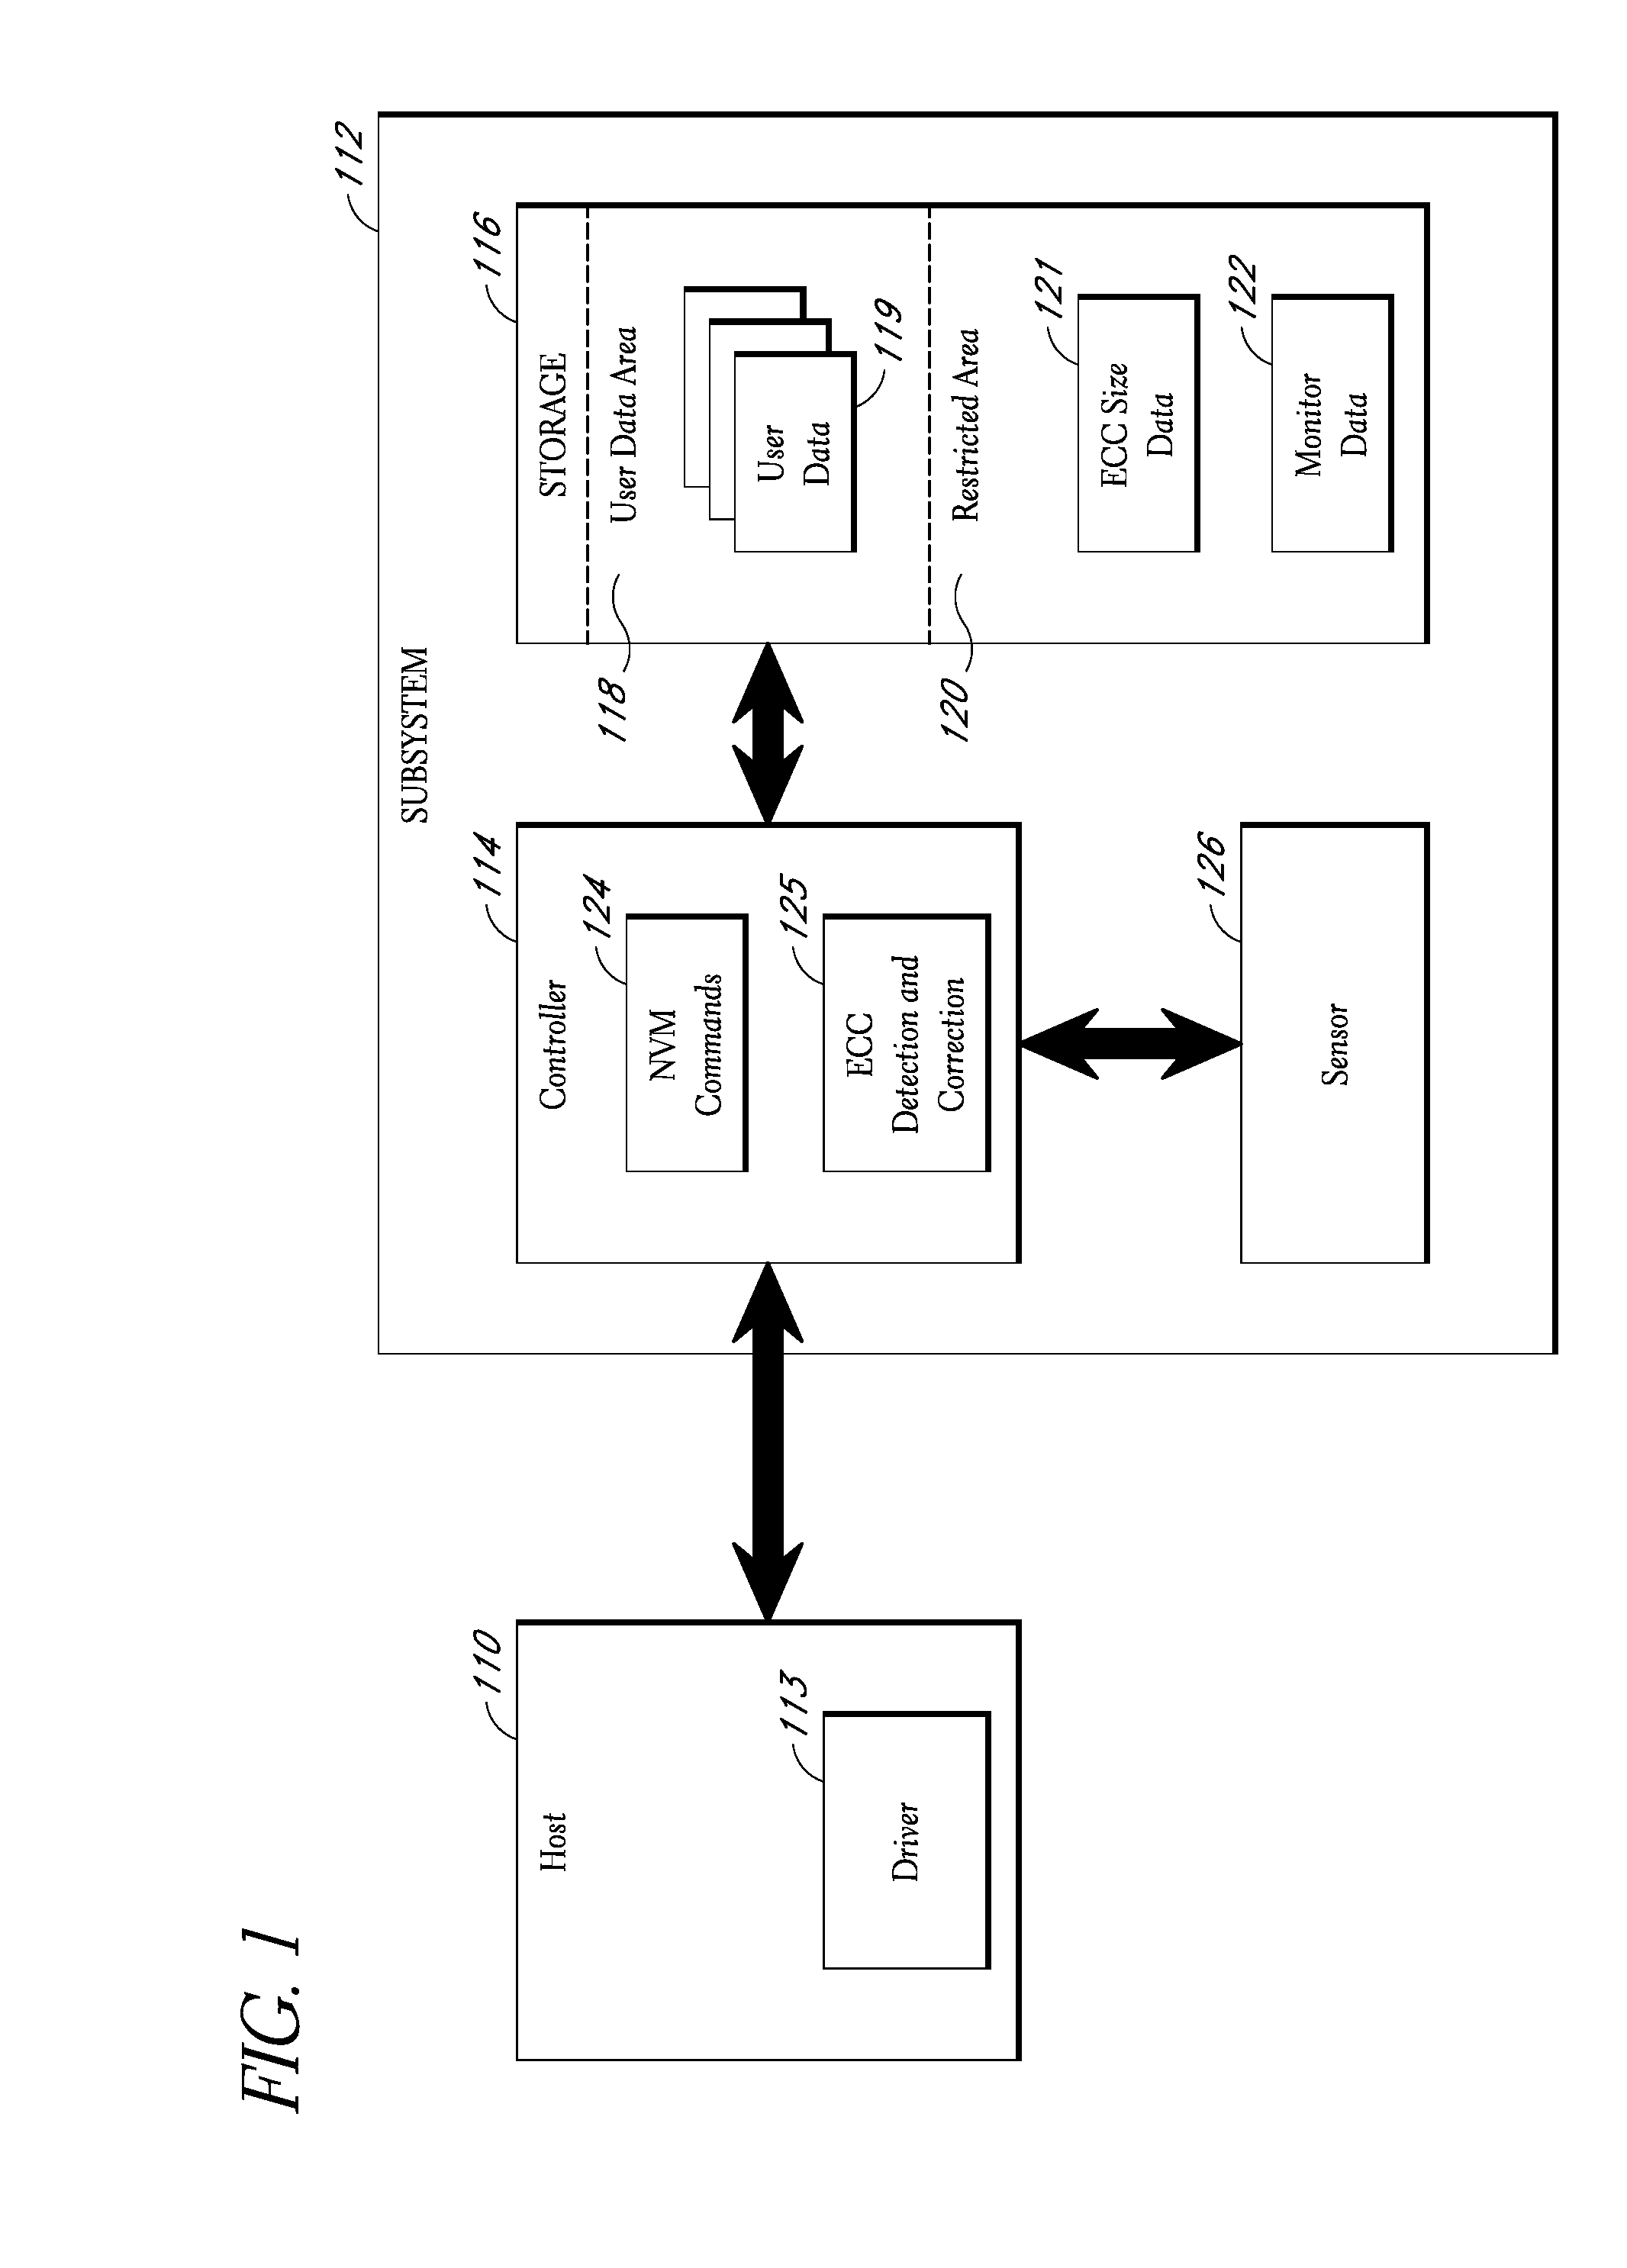 Storage subsystem capable of adjusting ECC settings based on monitored conditions